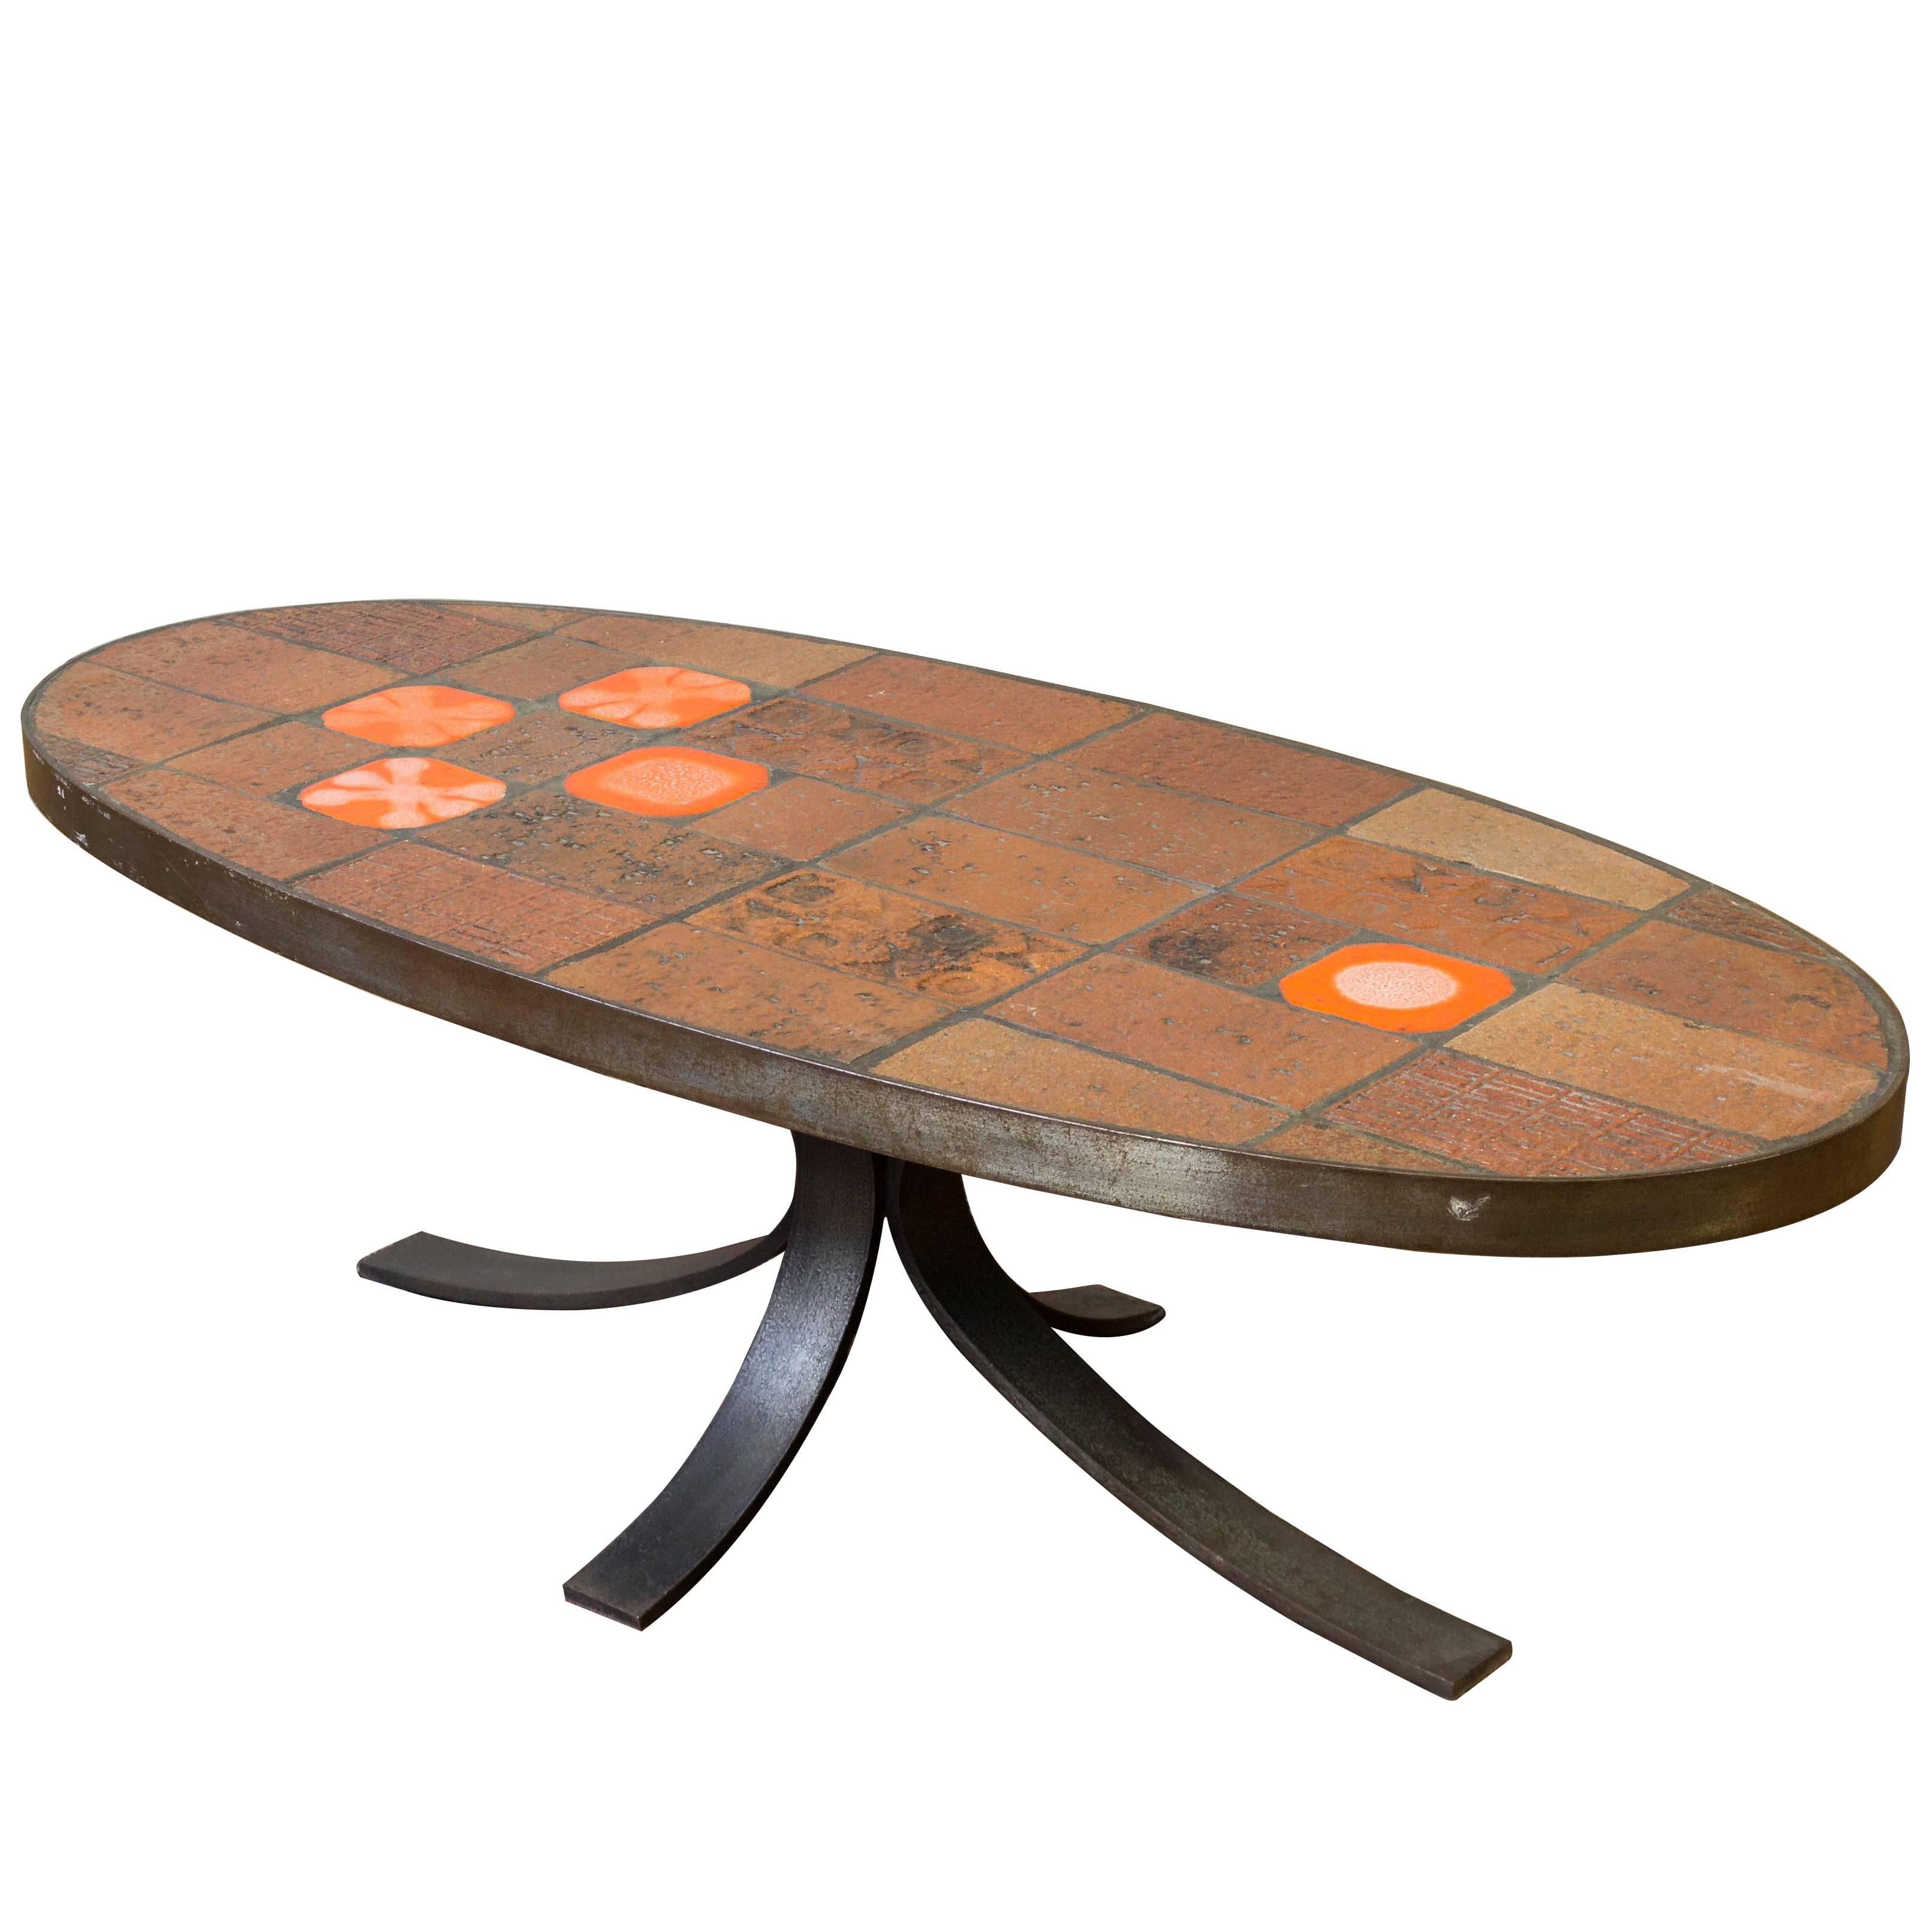 Steel and Ceramic Tile Oval Coffee Table